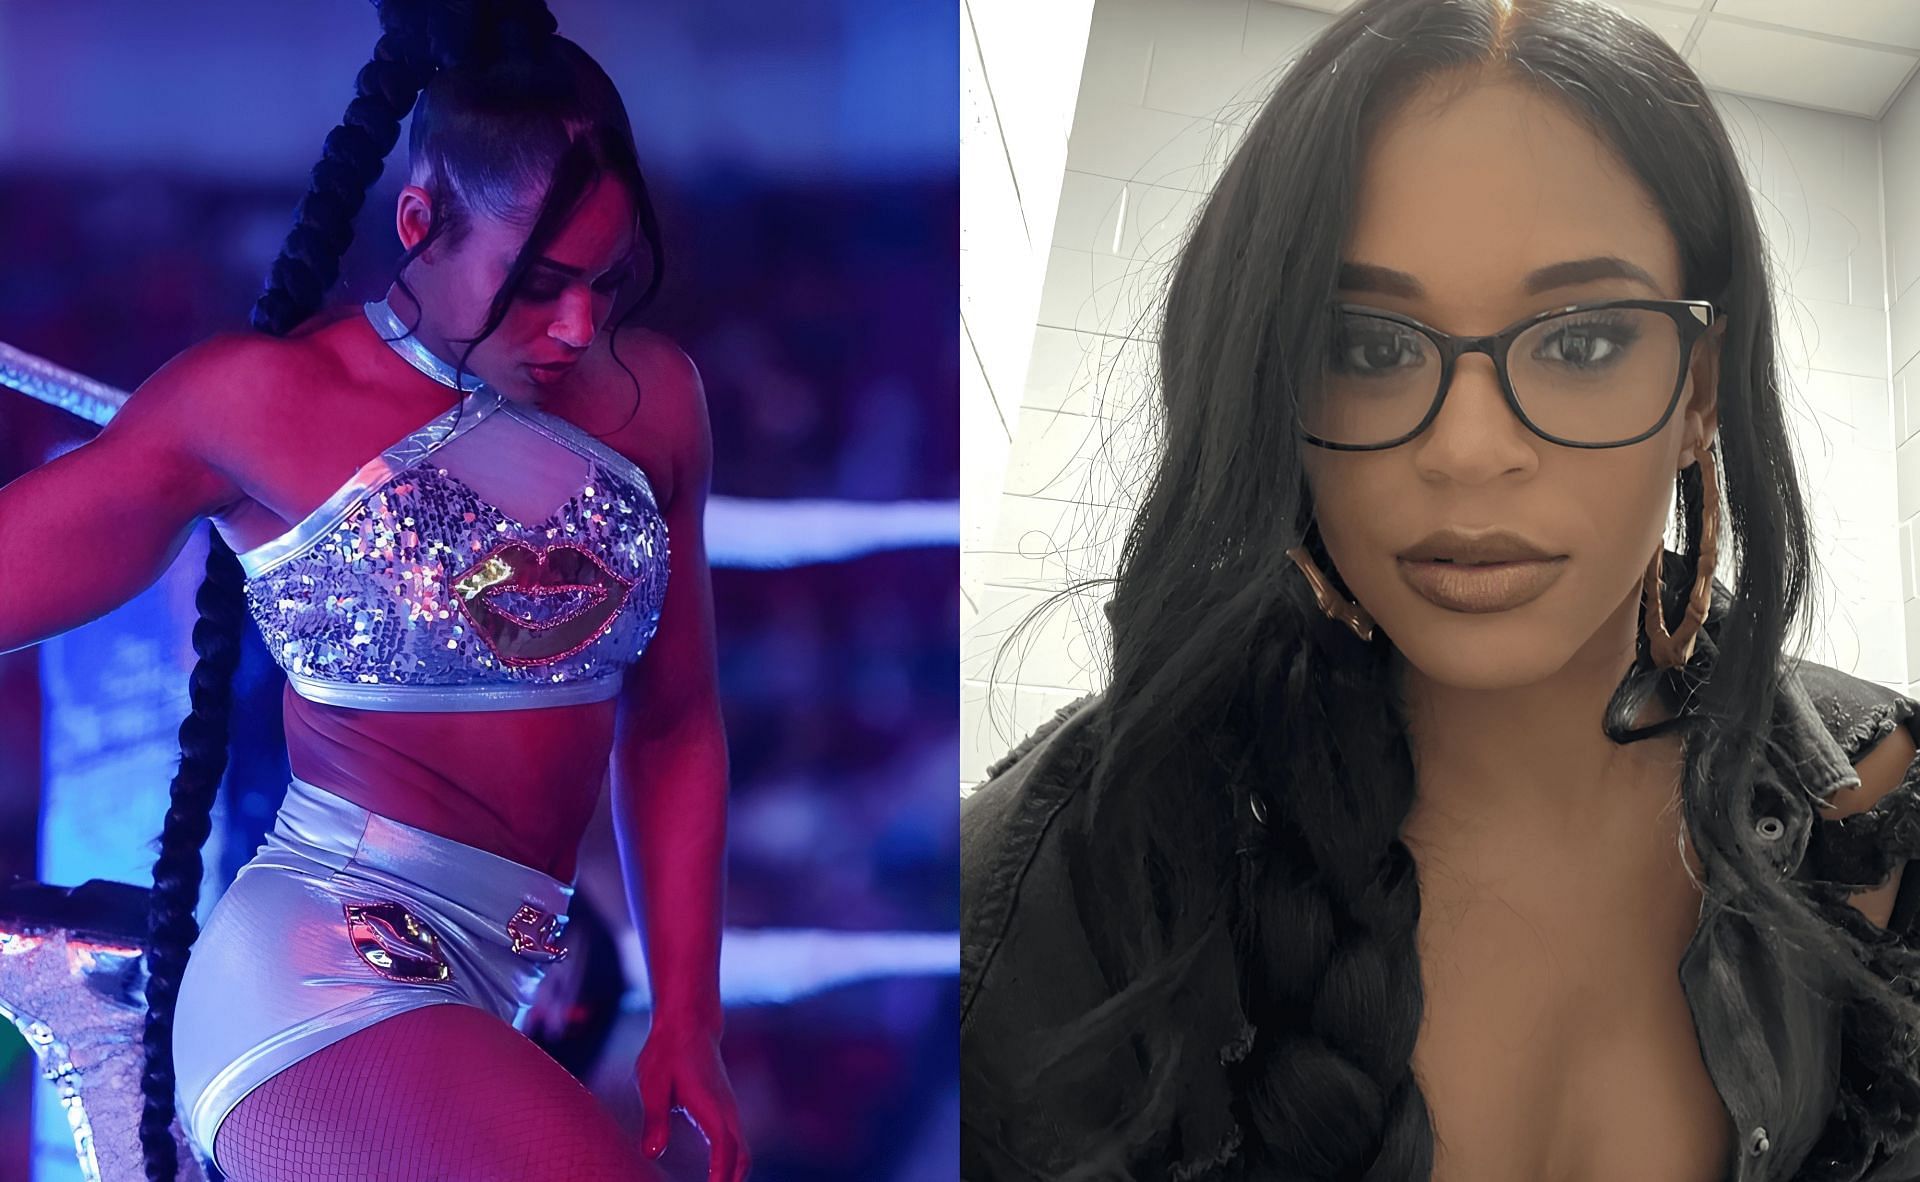 Bianca Belair is currently drafted on SmackDown